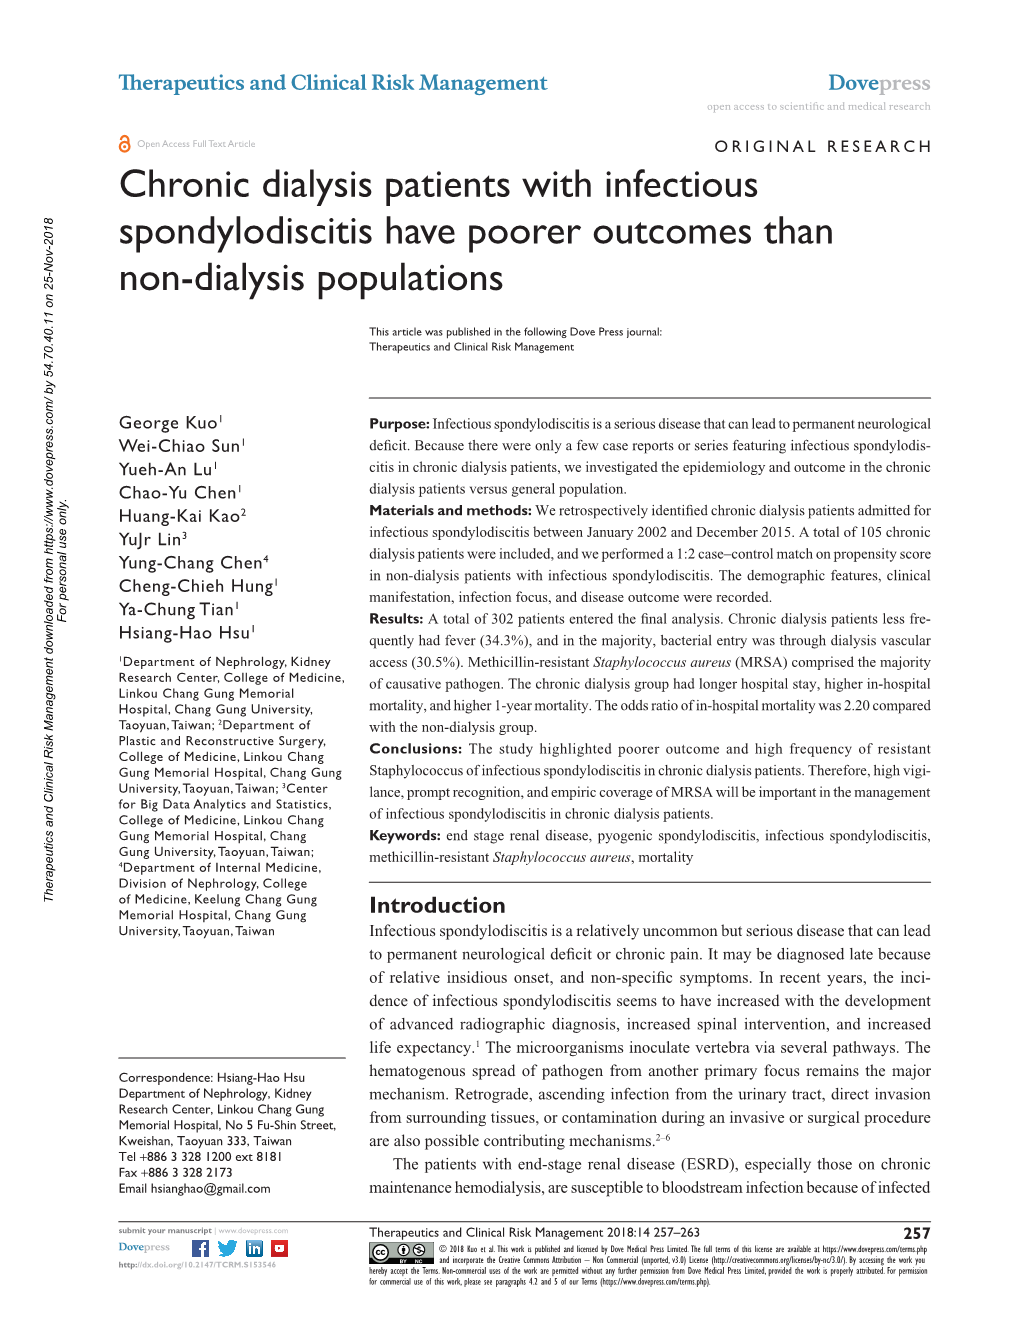 Chronic Dialysis Patients with Infectious Spondylodiscitis Have Poorer Outcomes Than Non-Dialysis Populations